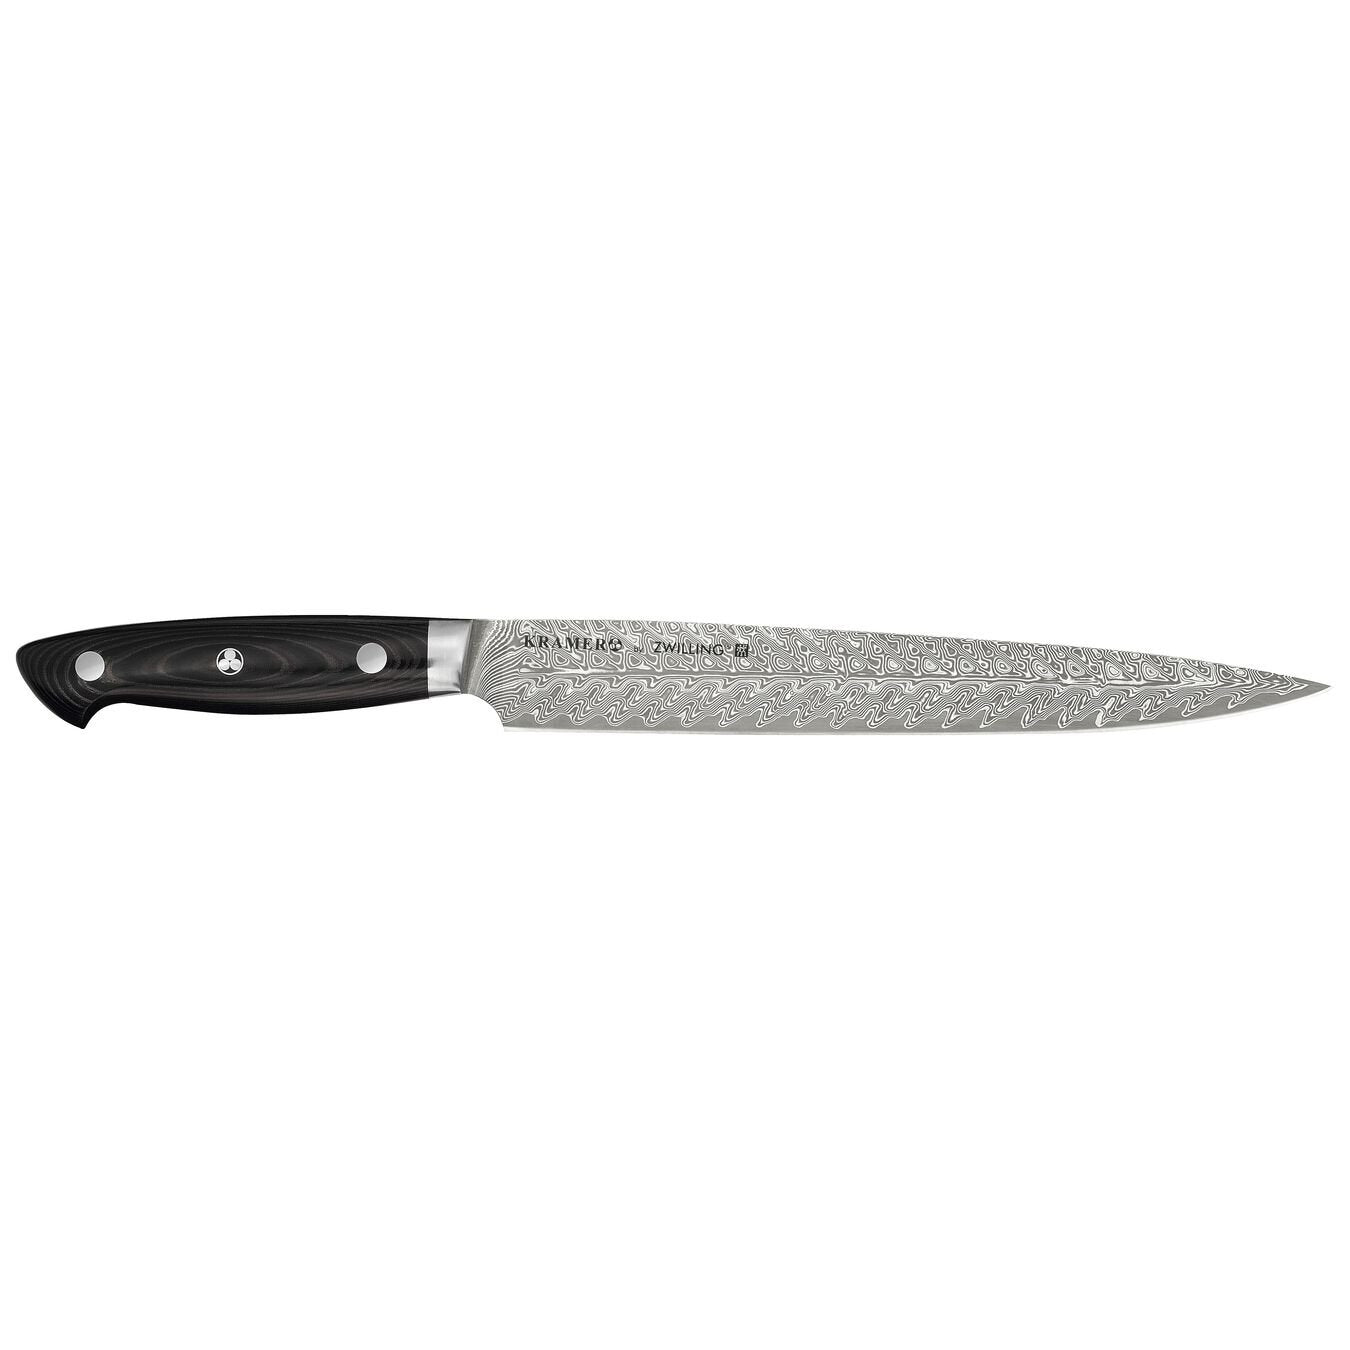 Kramer by Zwilling Euroline Damascus Collection Carving Knife 9in